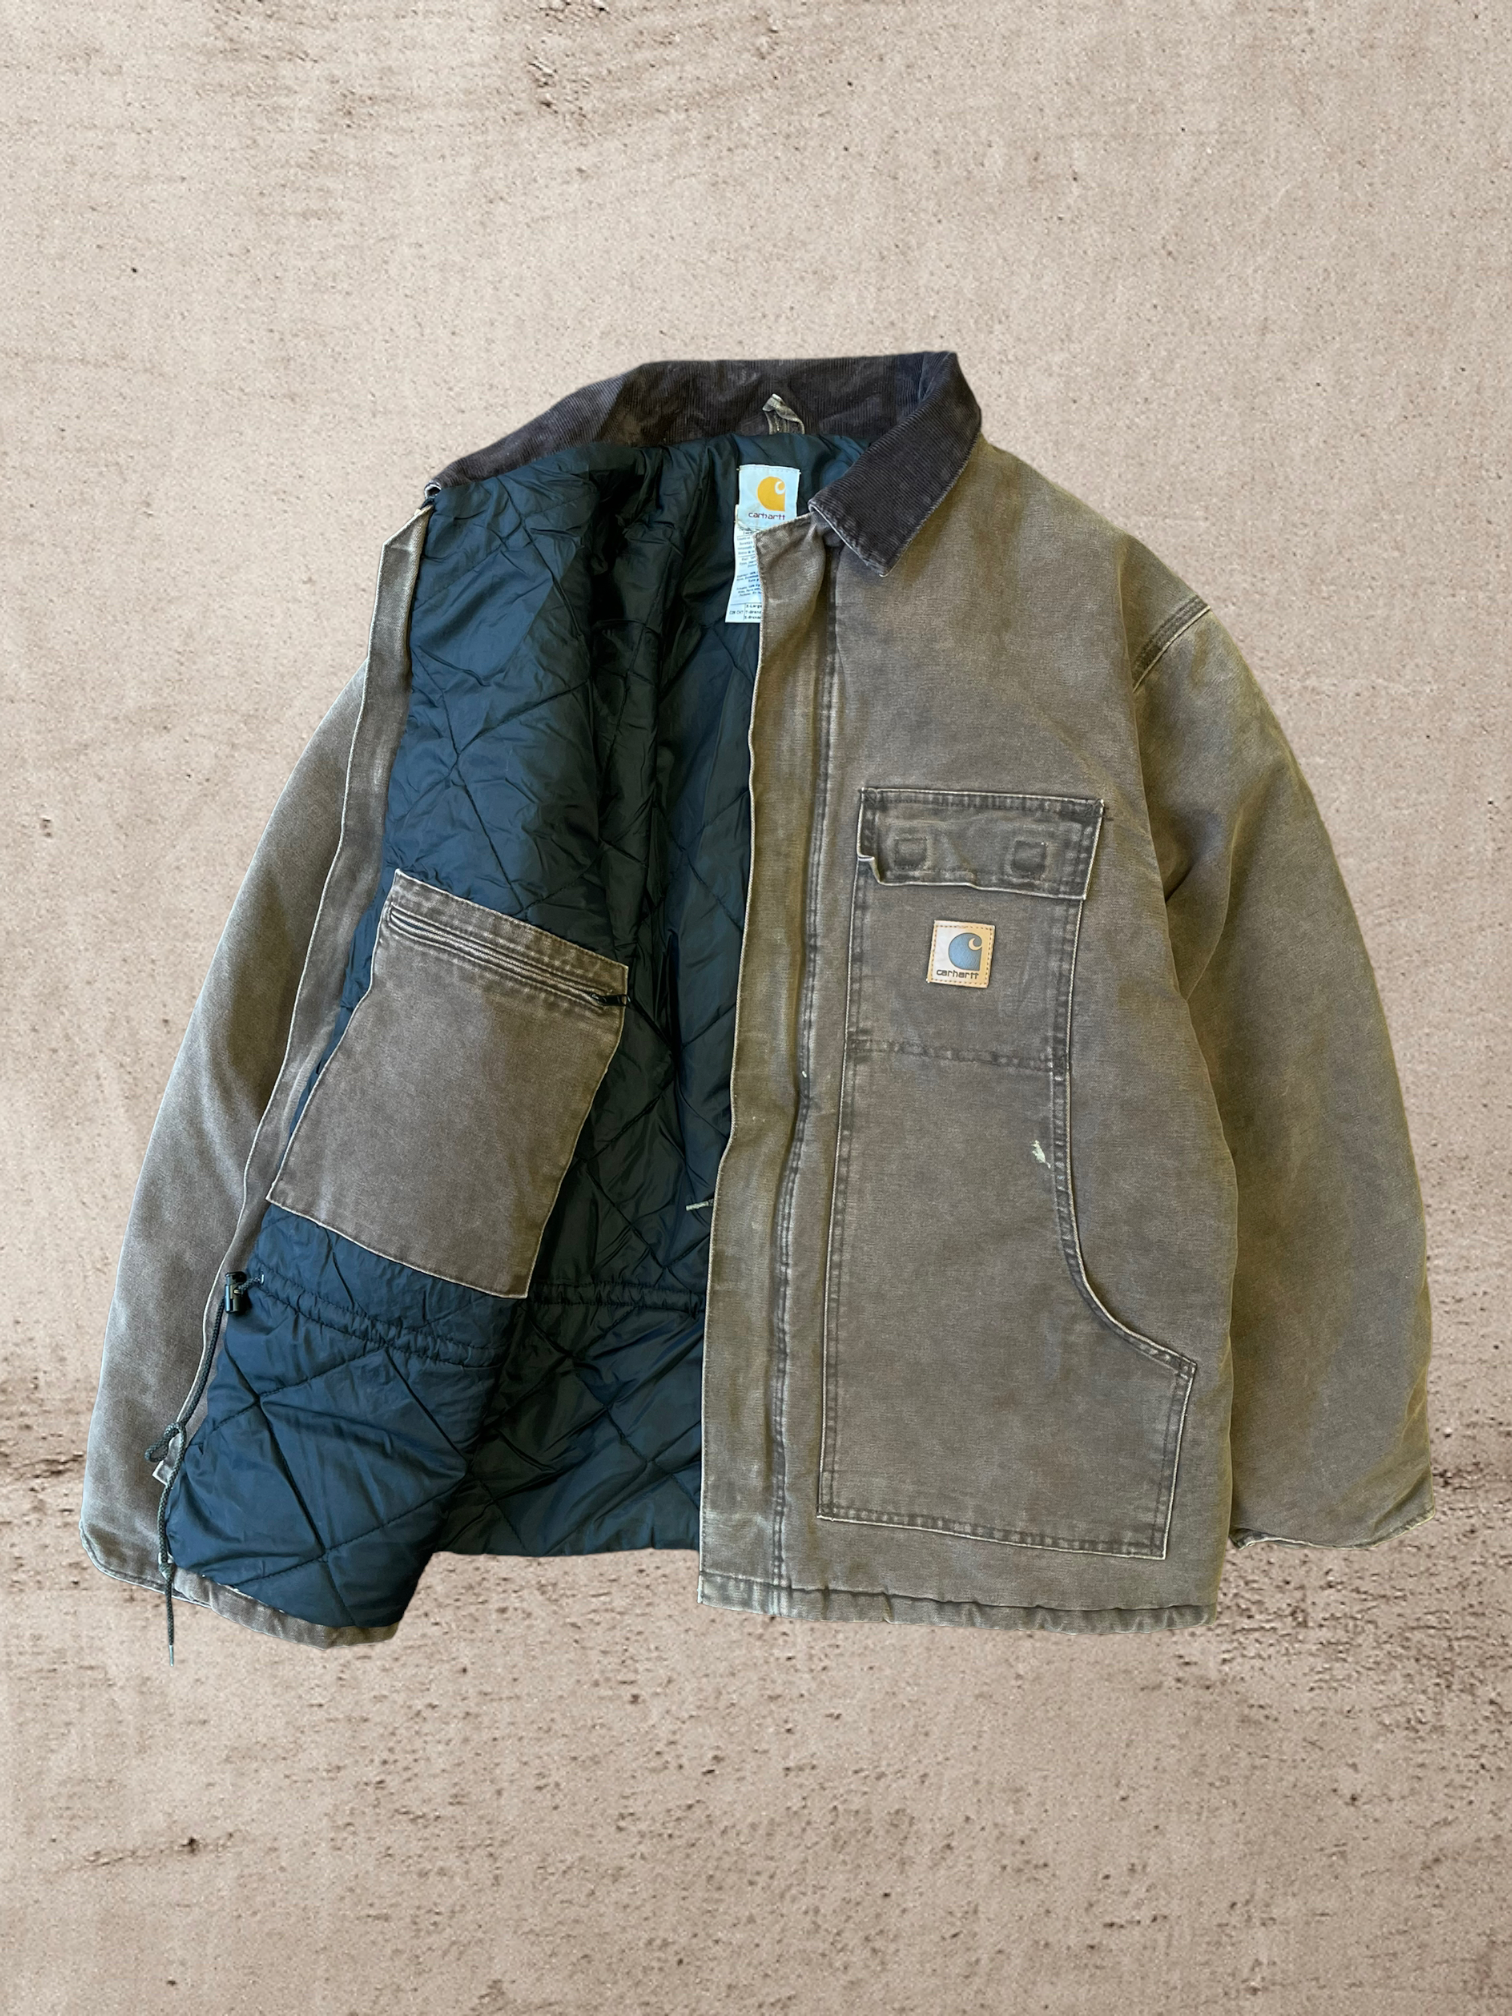 Vintage Carhartt Quilted Lined Jacket - X-Large